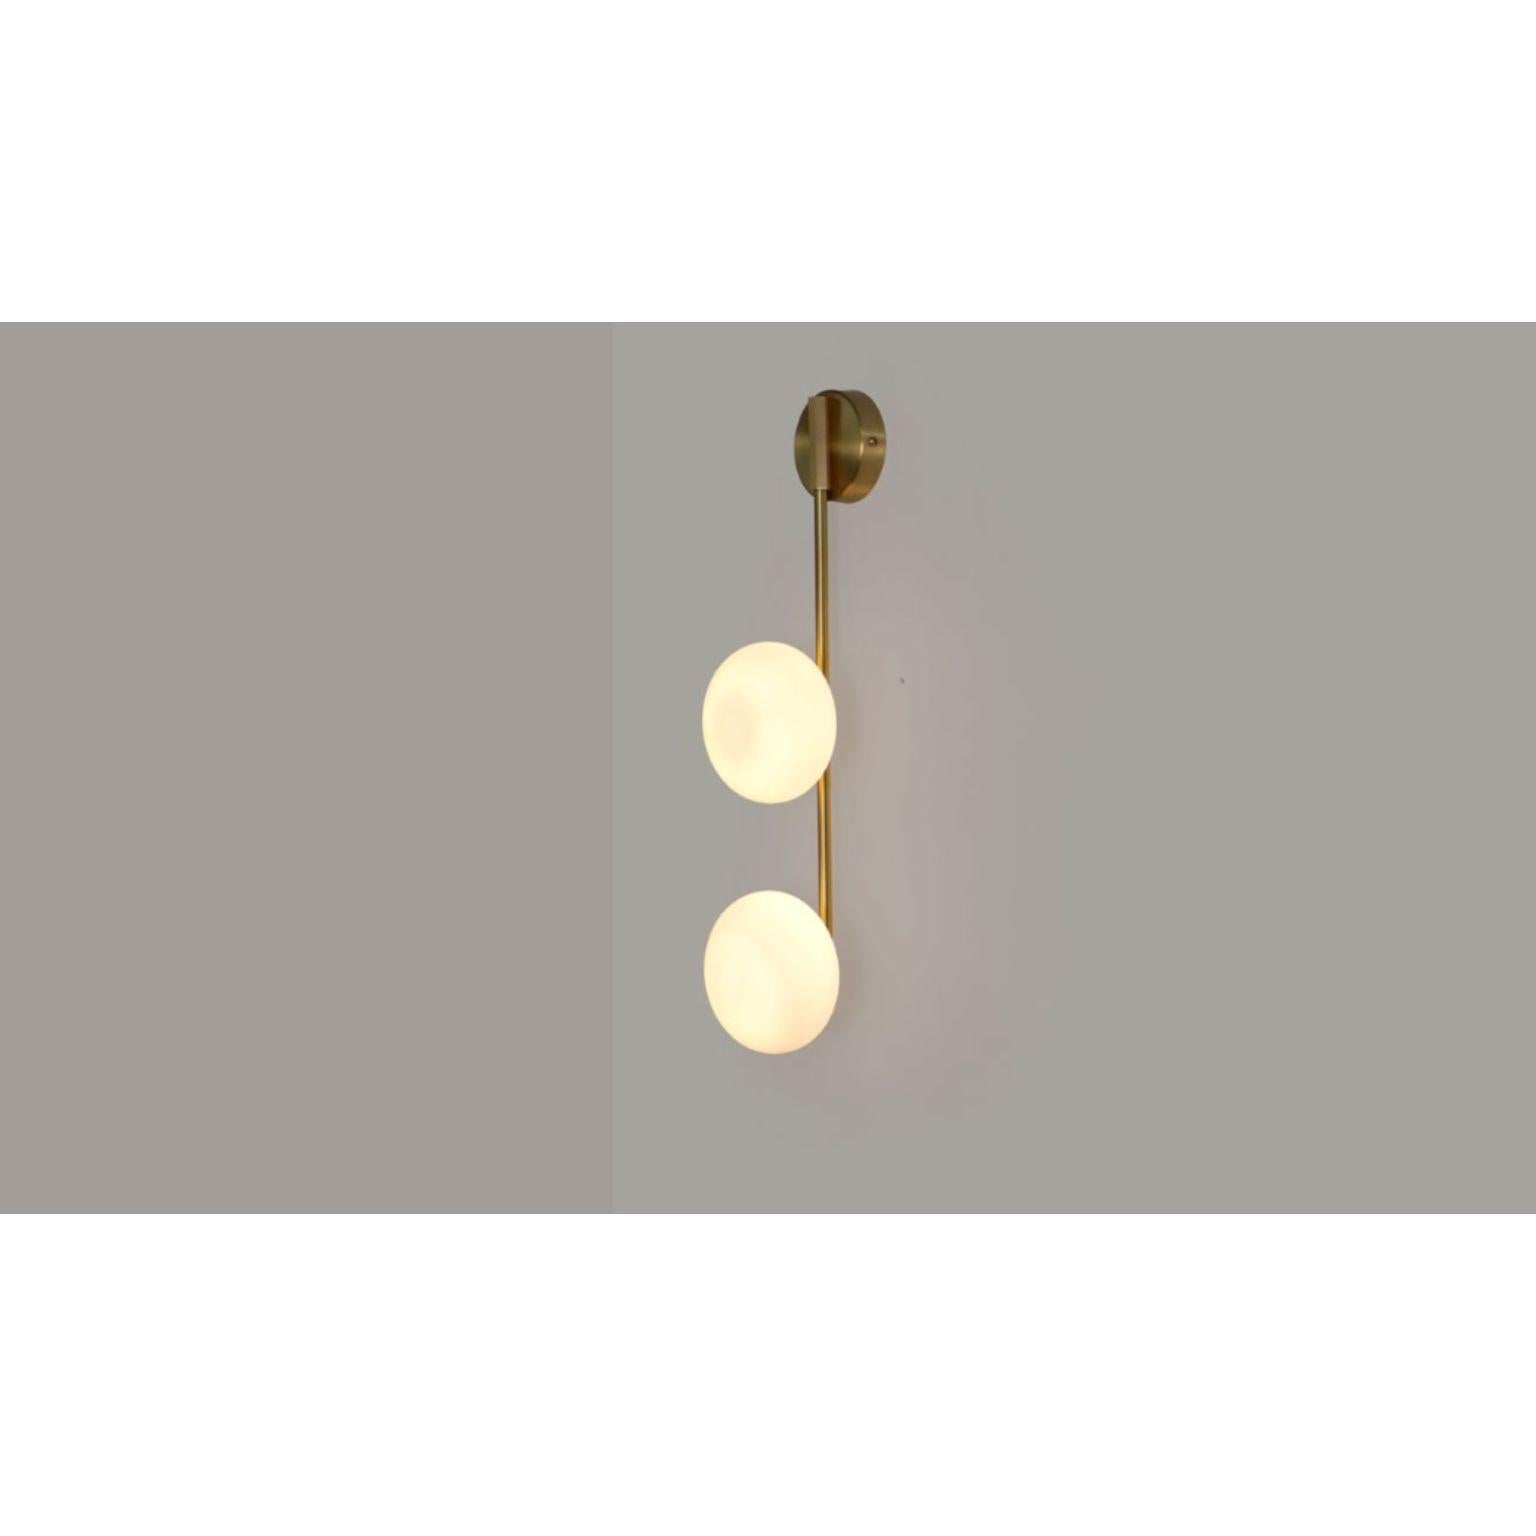 Other Link One Glass Globe Wall Sconce by Lamp Shaper For Sale